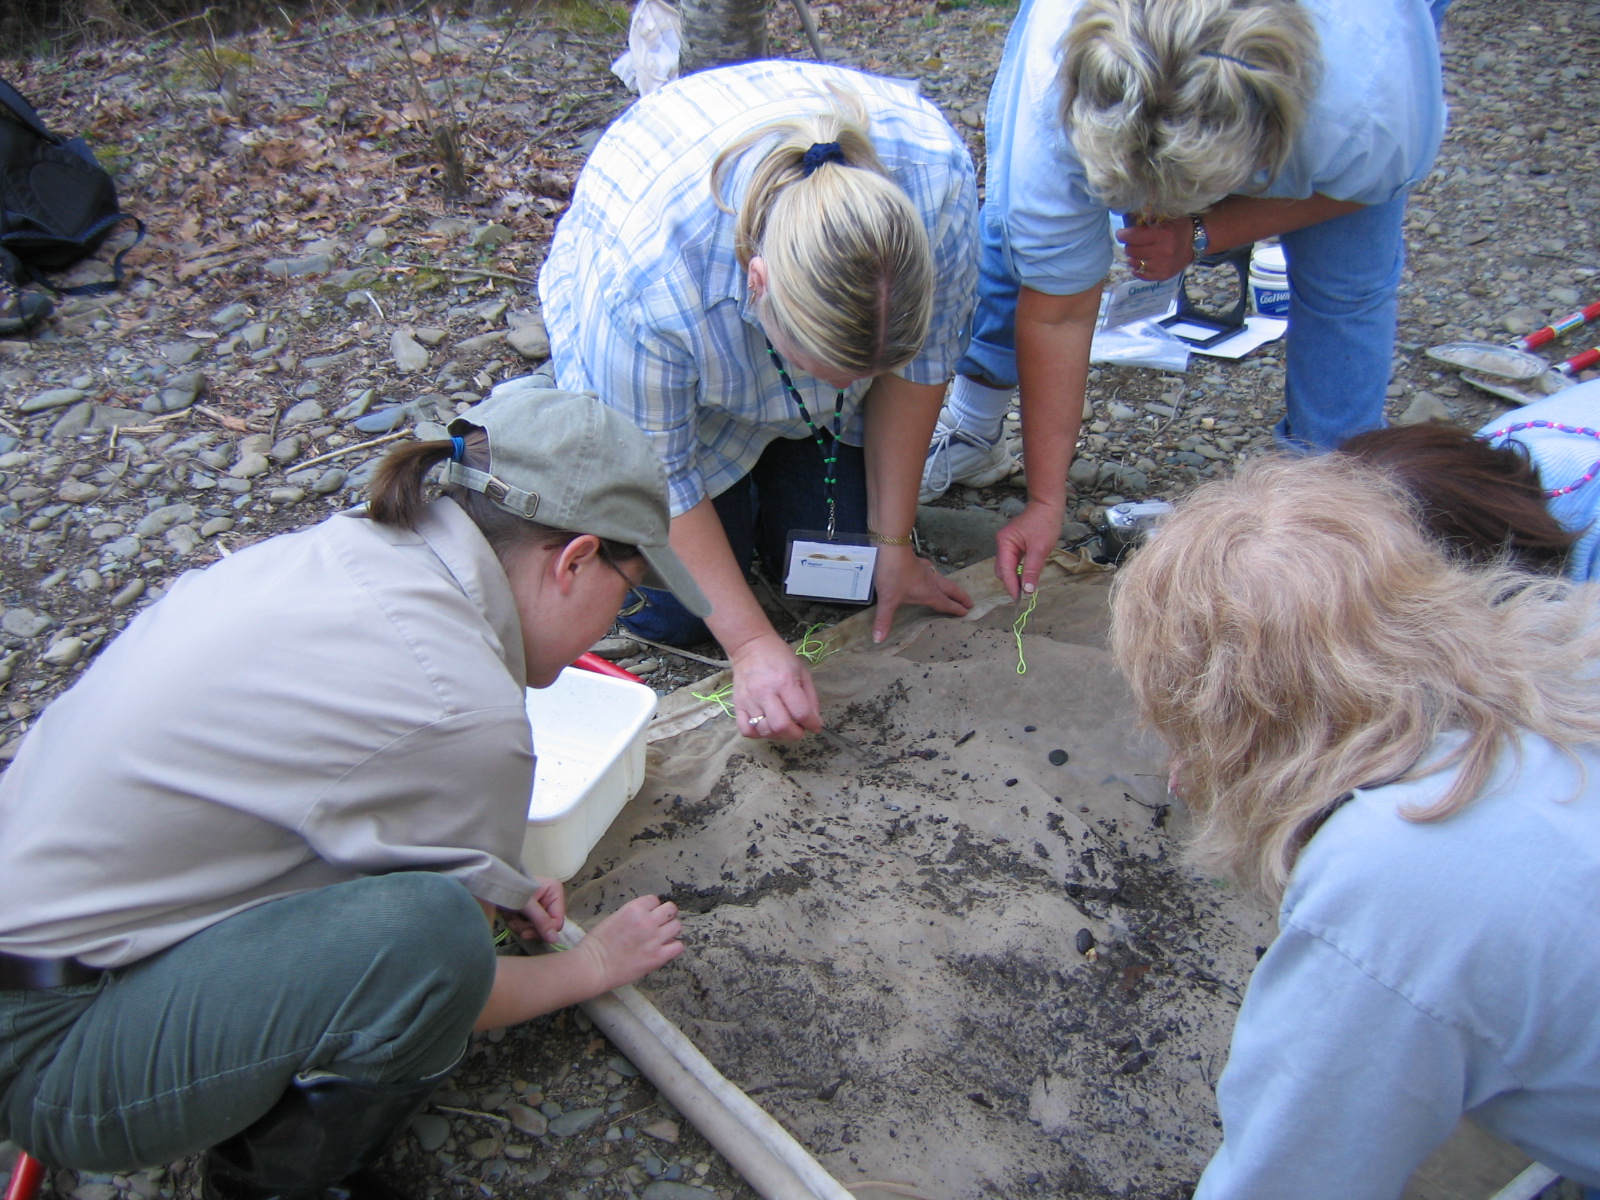 Three people and one ranger kneeling around a dirt plot holding forceps